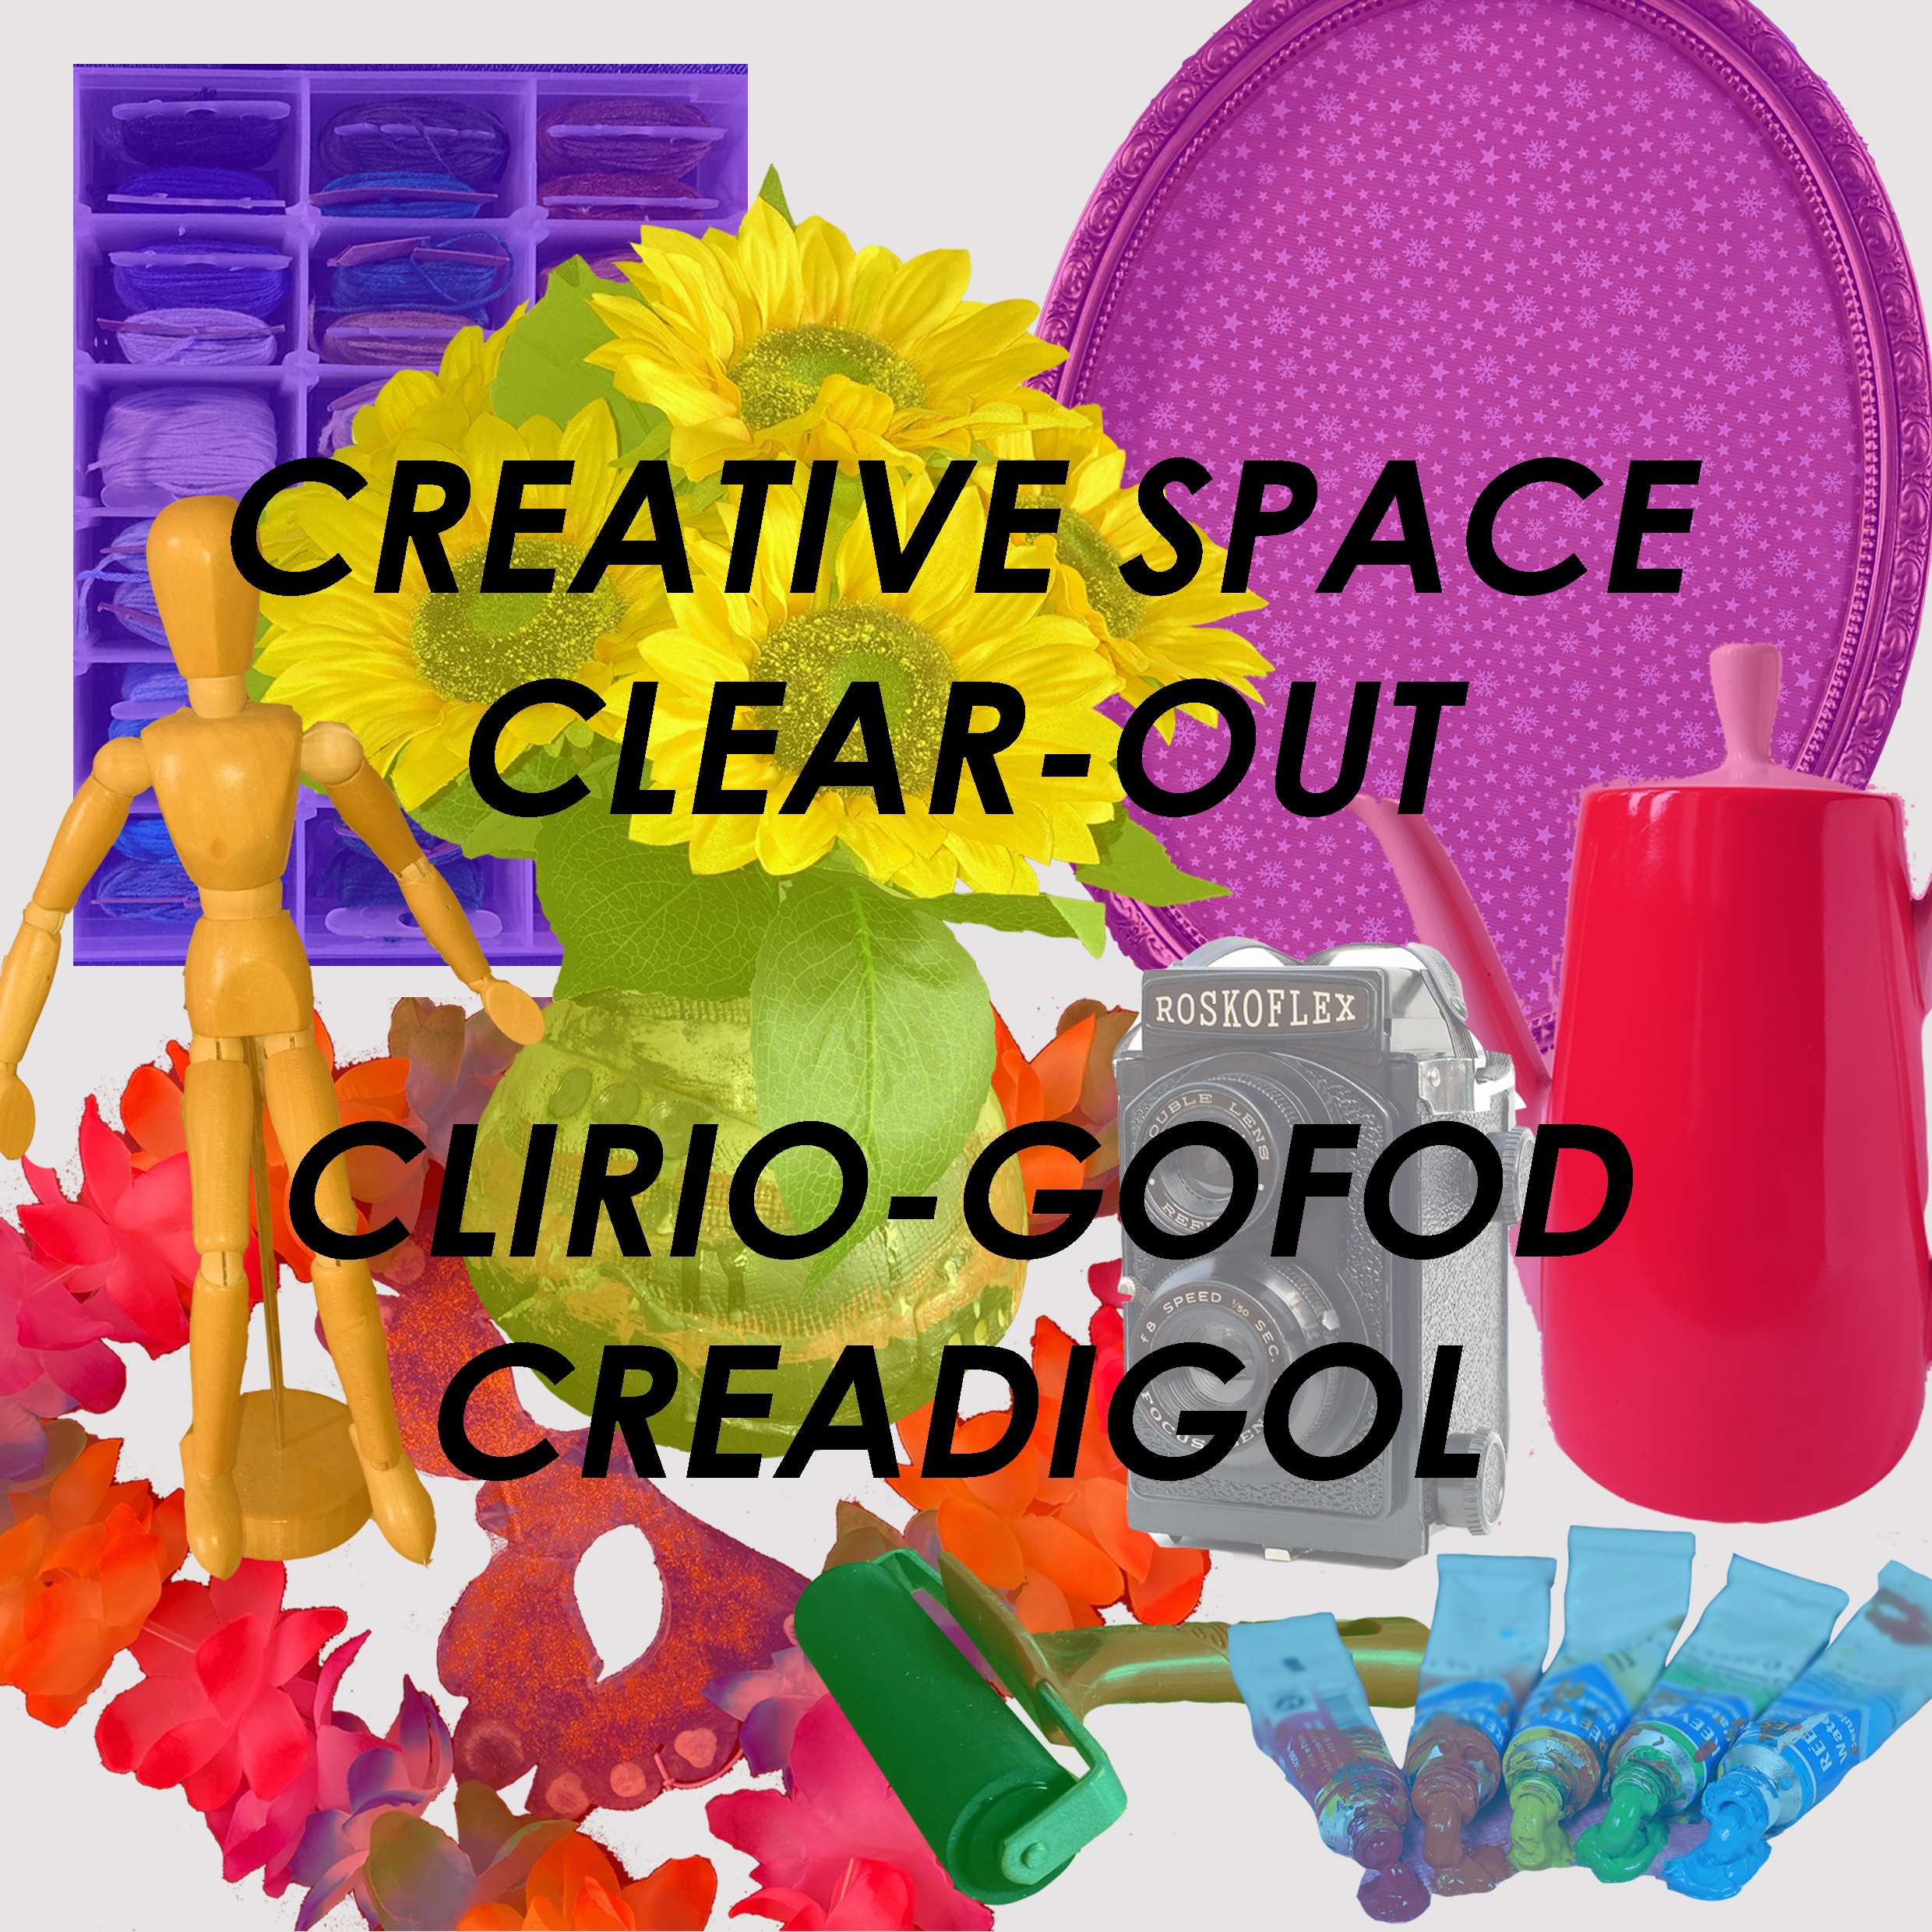 Creative Space clear out bilingual text over colourful arts supplies